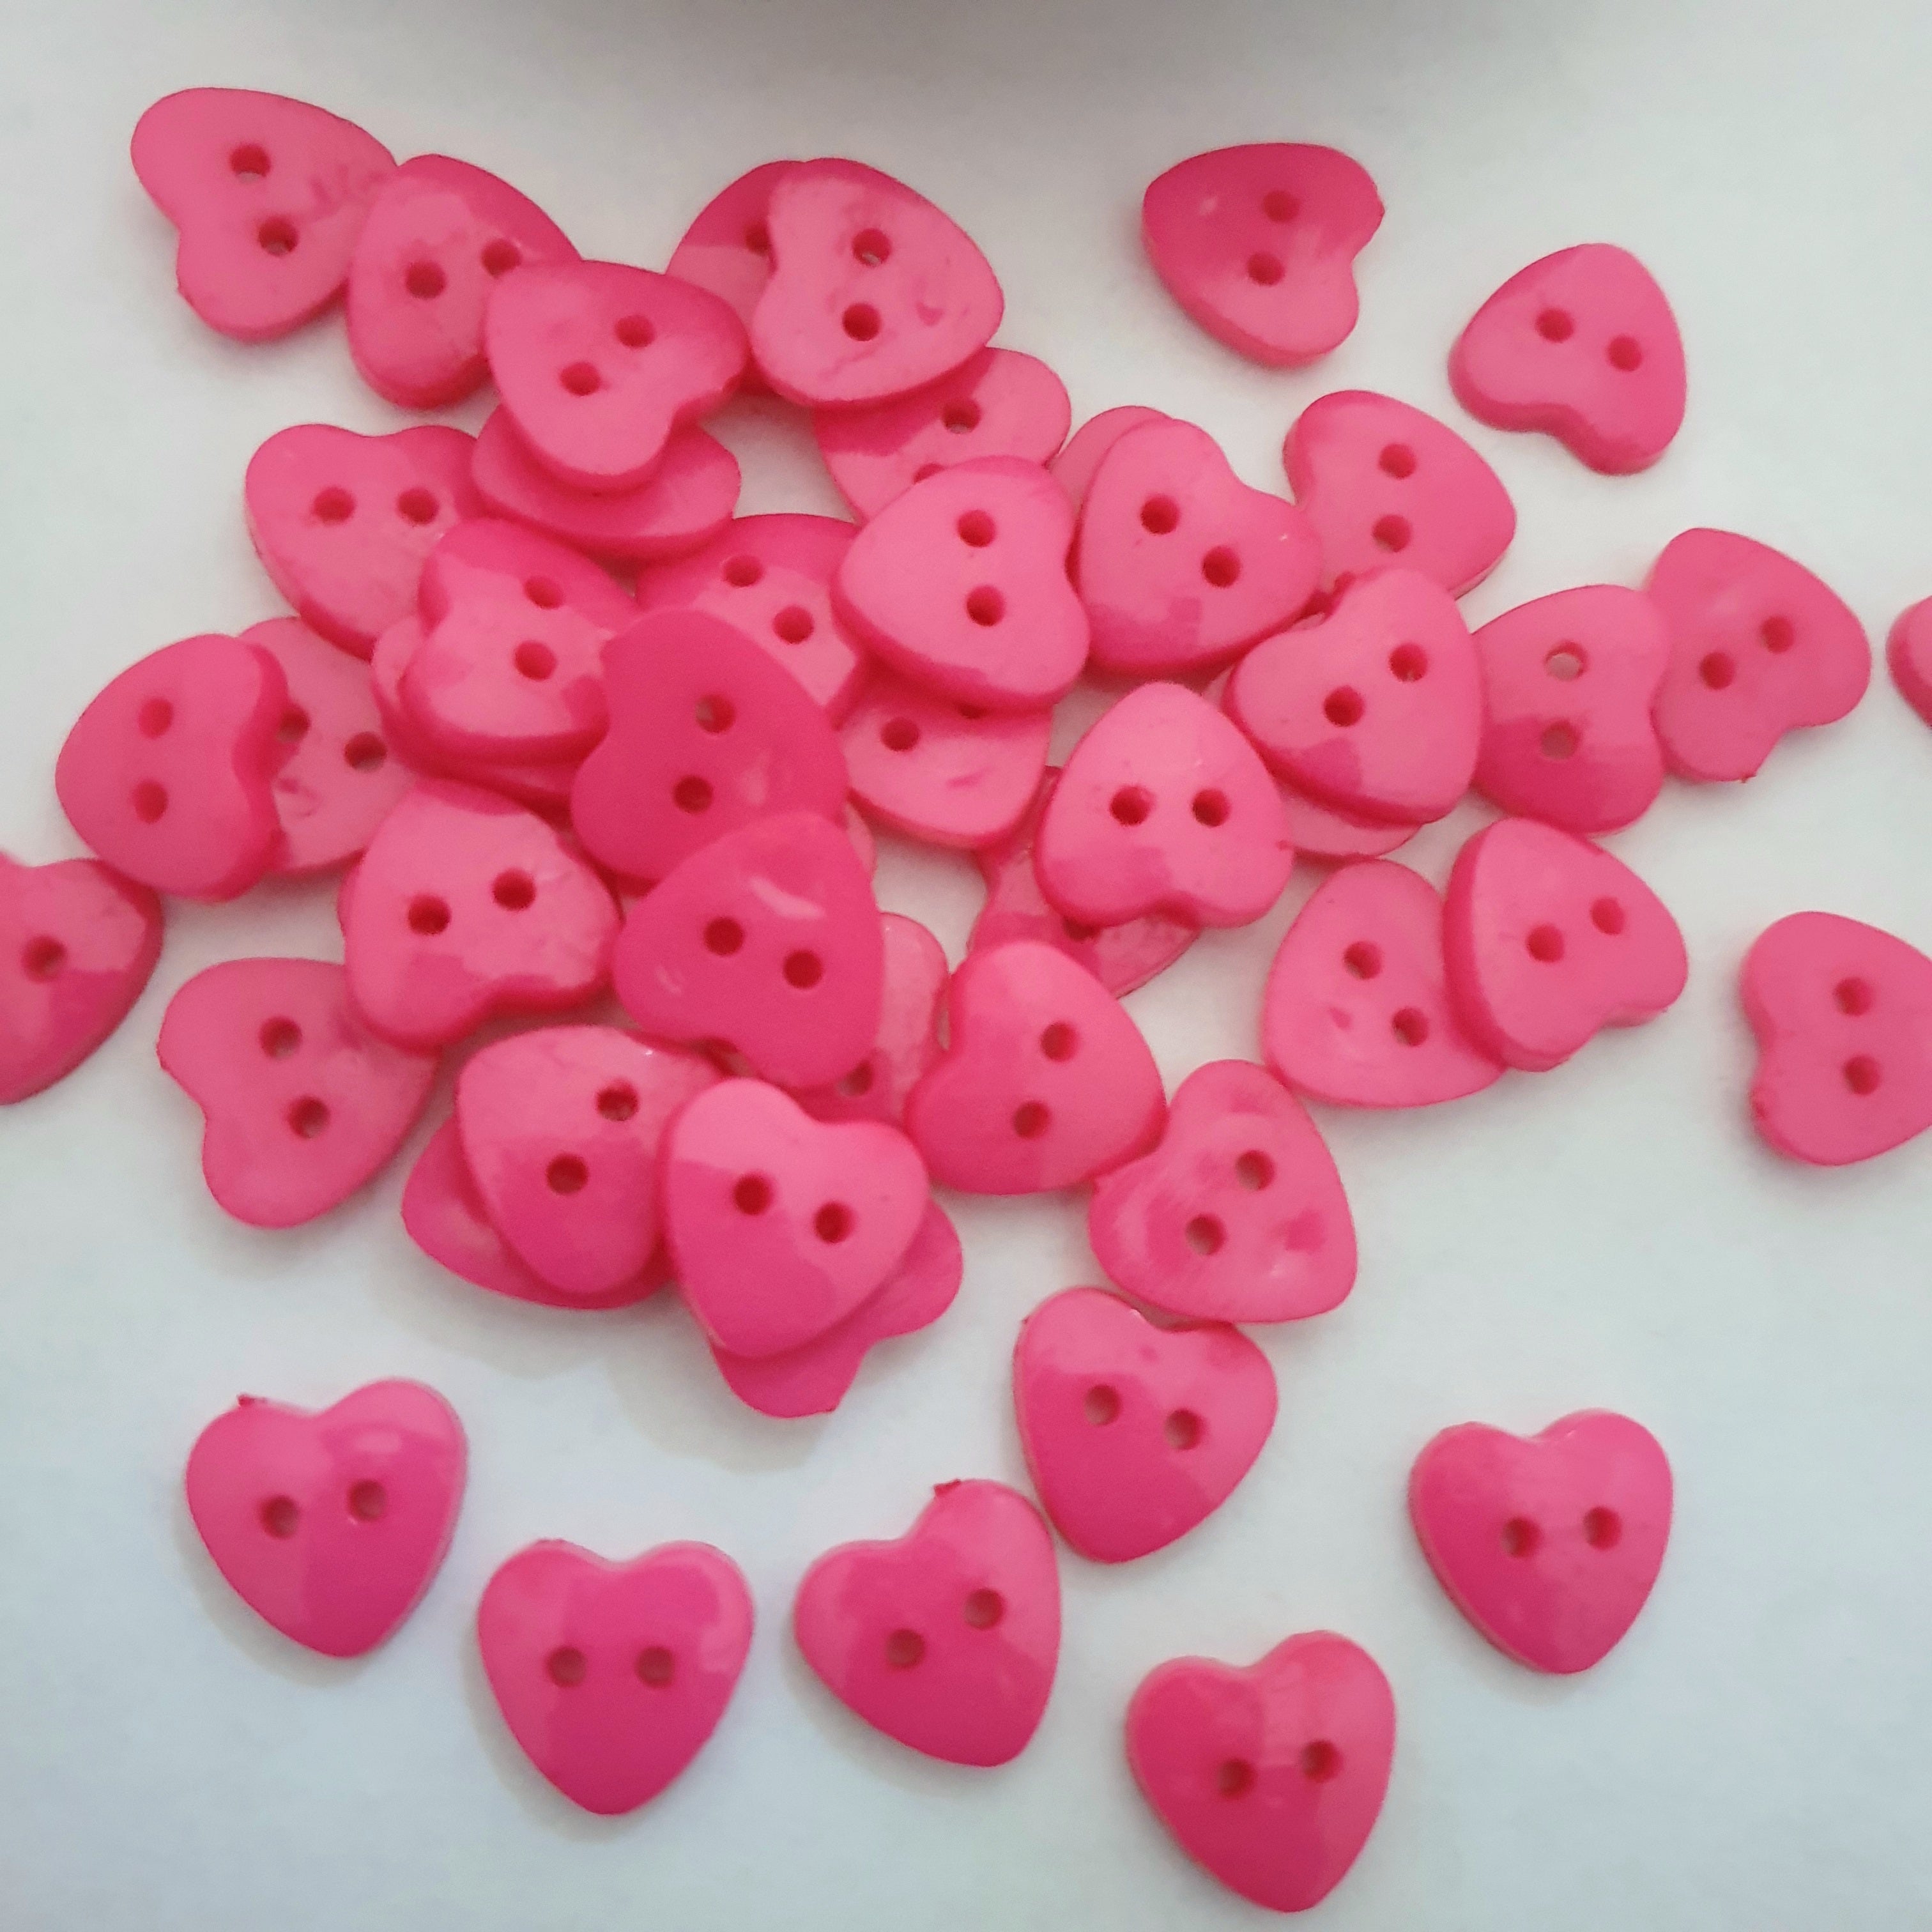 MajorCrafts 60pcs 13mm Hot Pink Heart Shaped 2 Holes Resin Sewing Buttons